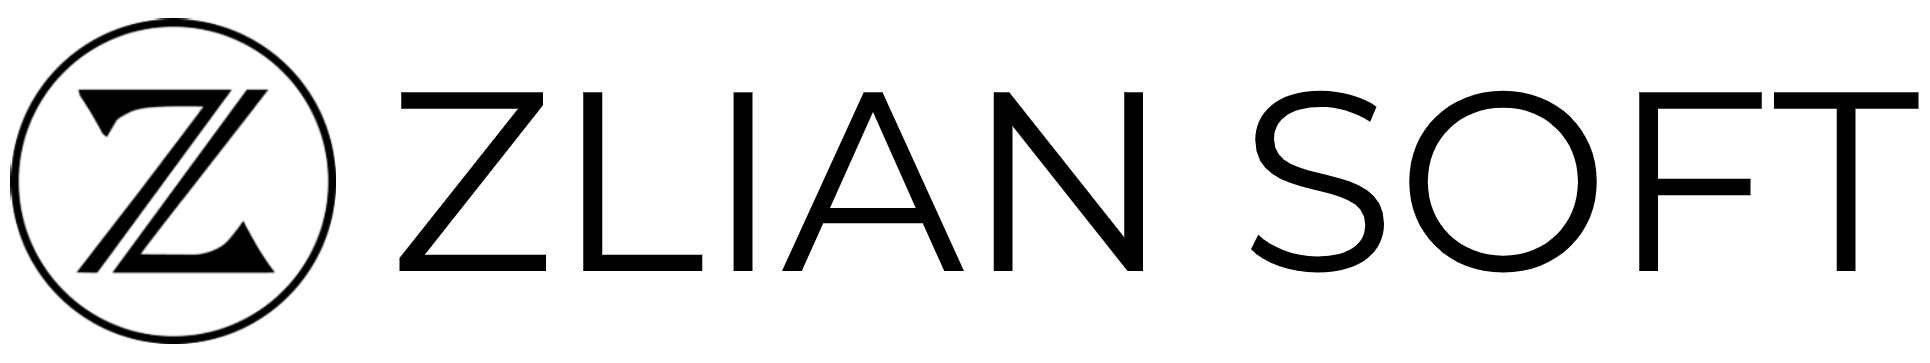 logo_black_with_text